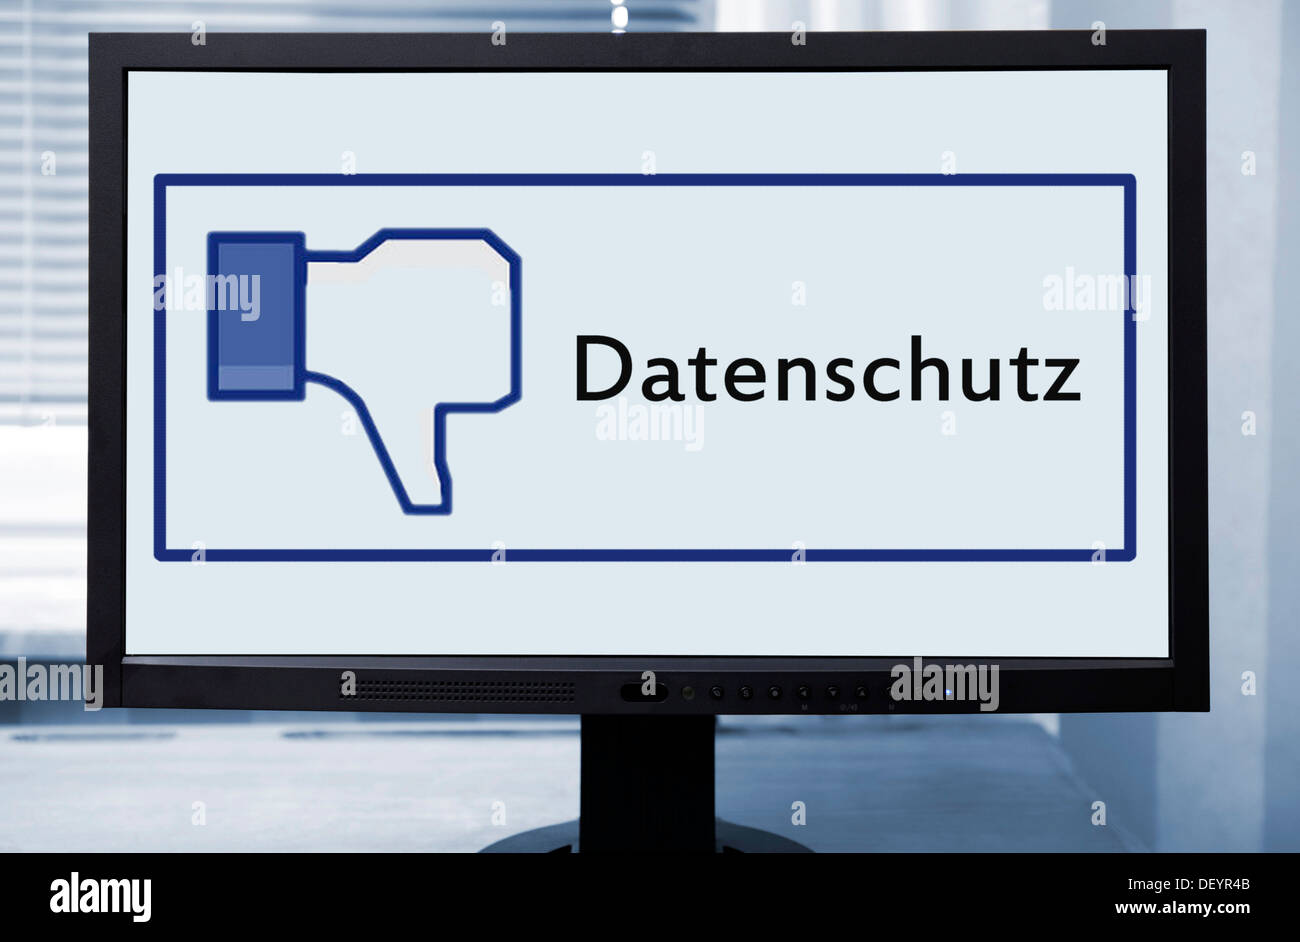 Datenschutz or data protection, data privacy problem on Facebook, symbolic image Stock Photo